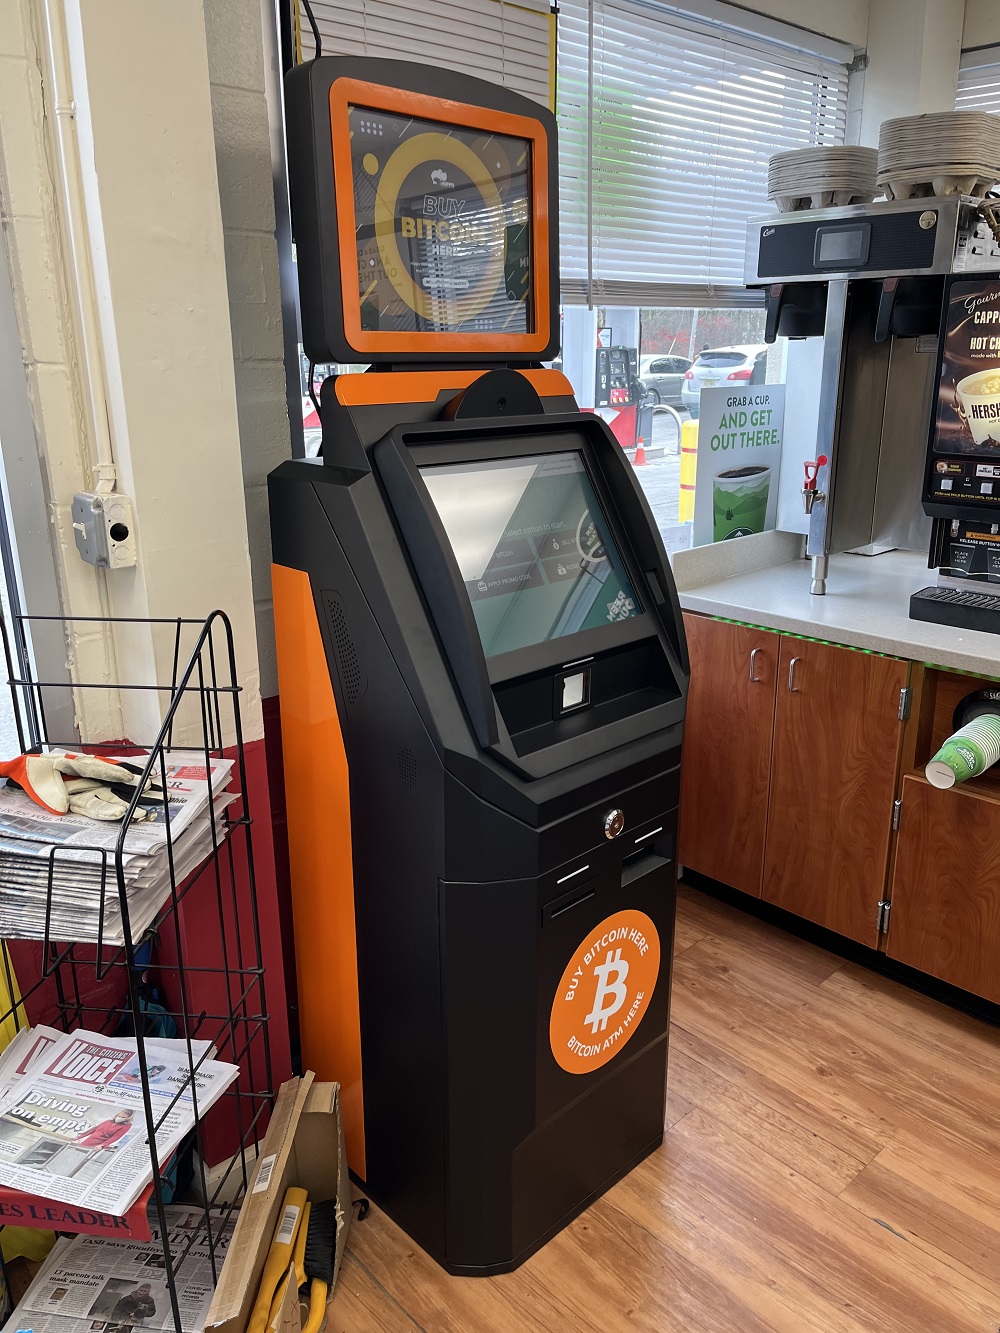 Bitcoin ATM at Dallas PA at ValleyMart Citgo gas station by Hippo